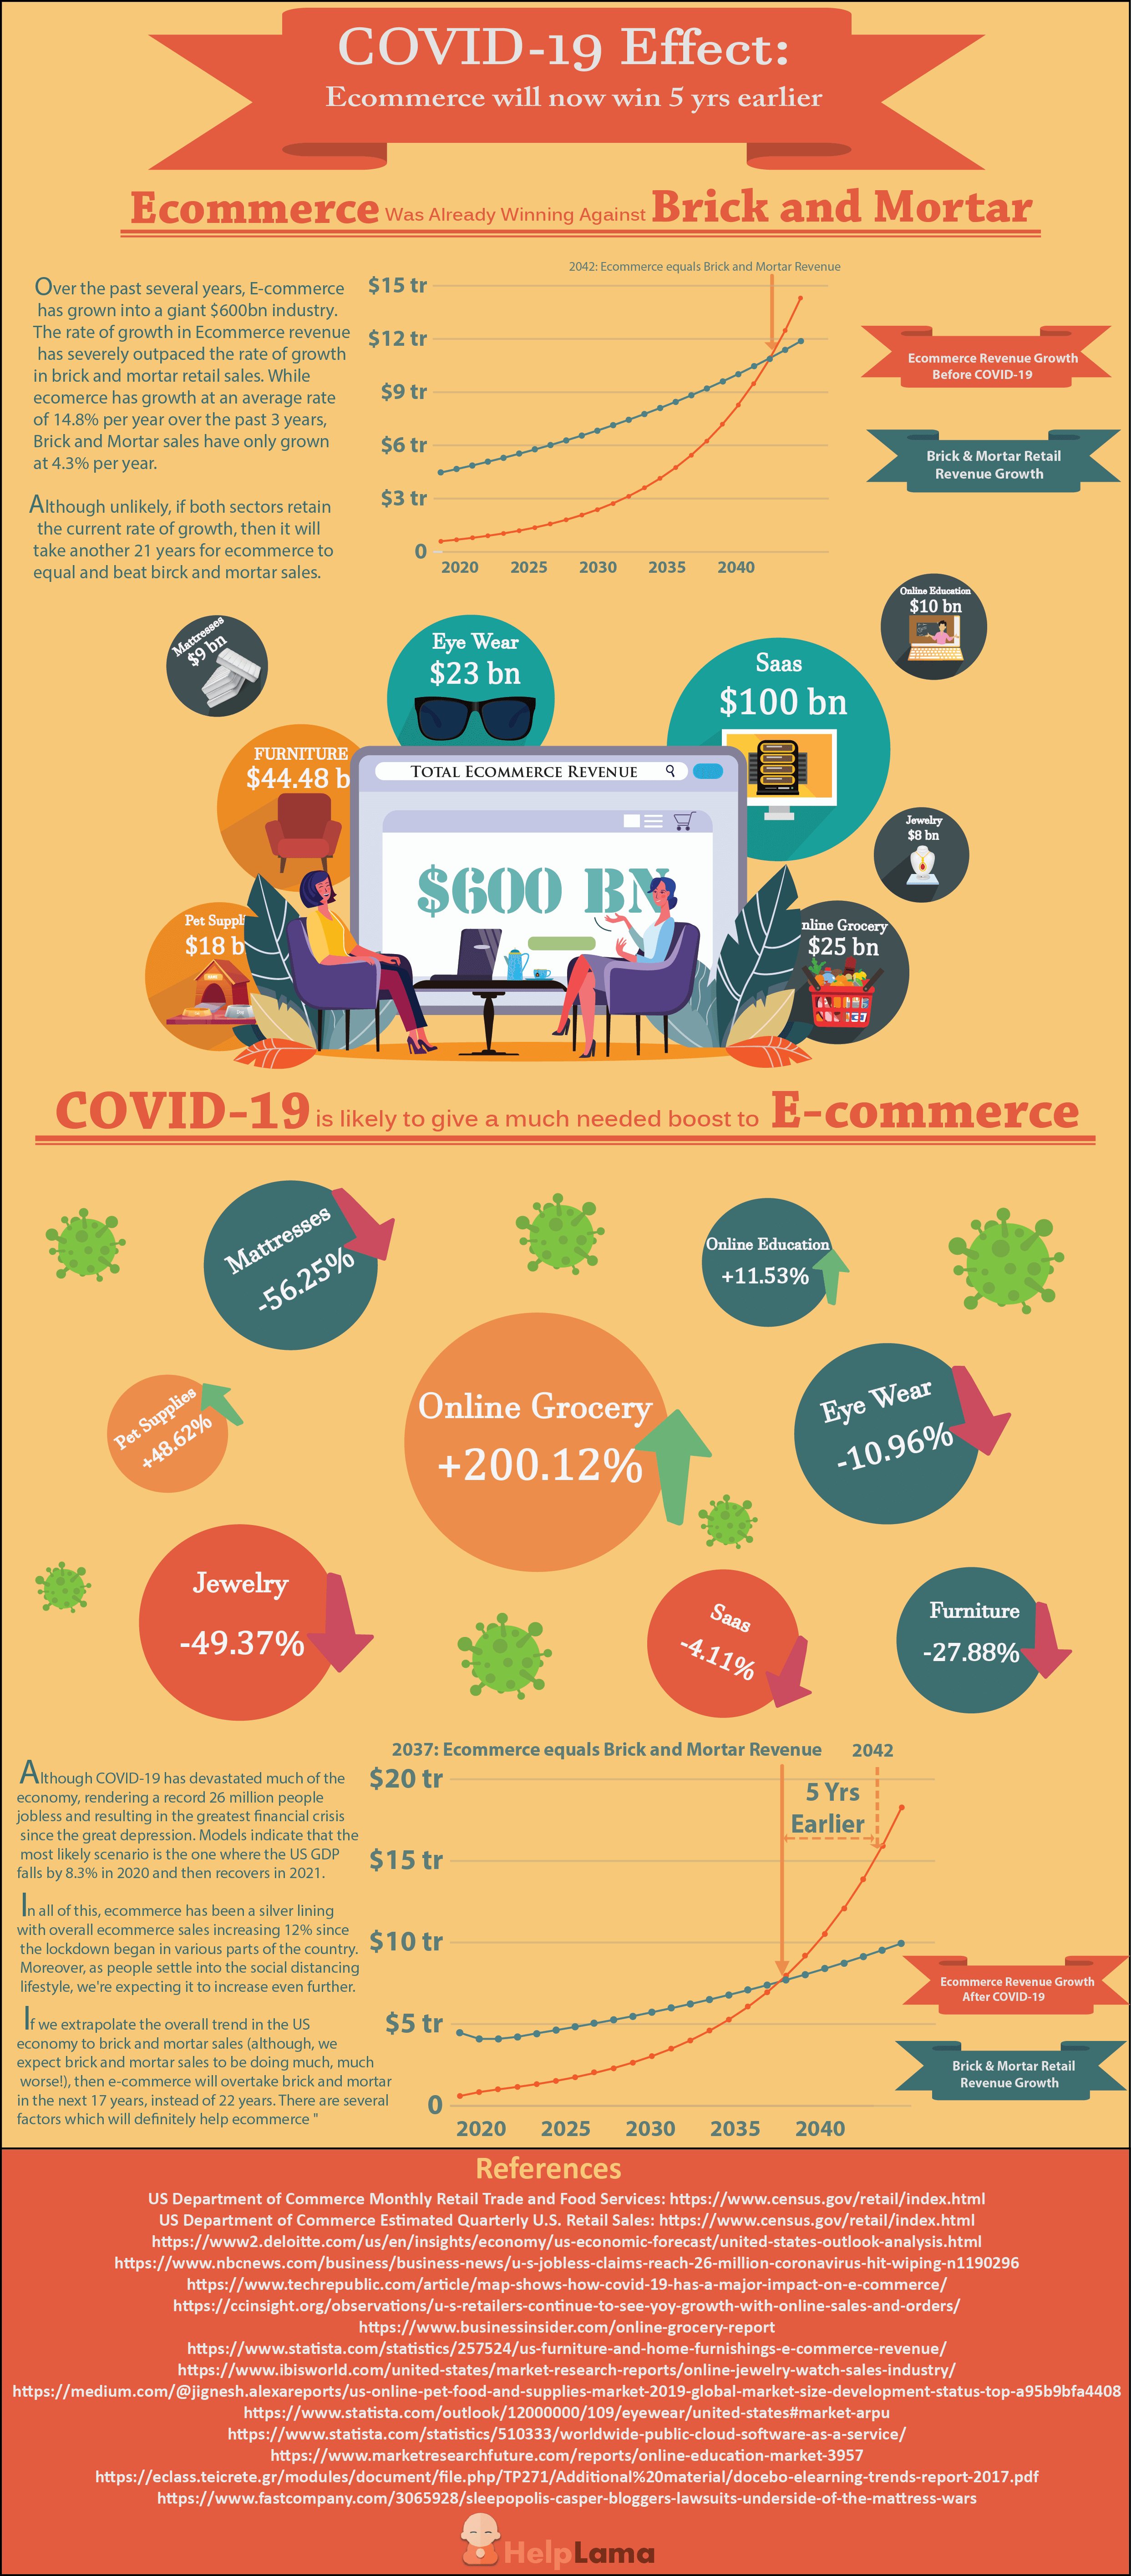 HelpLama assess the impact of COVID-19 on eCommerce